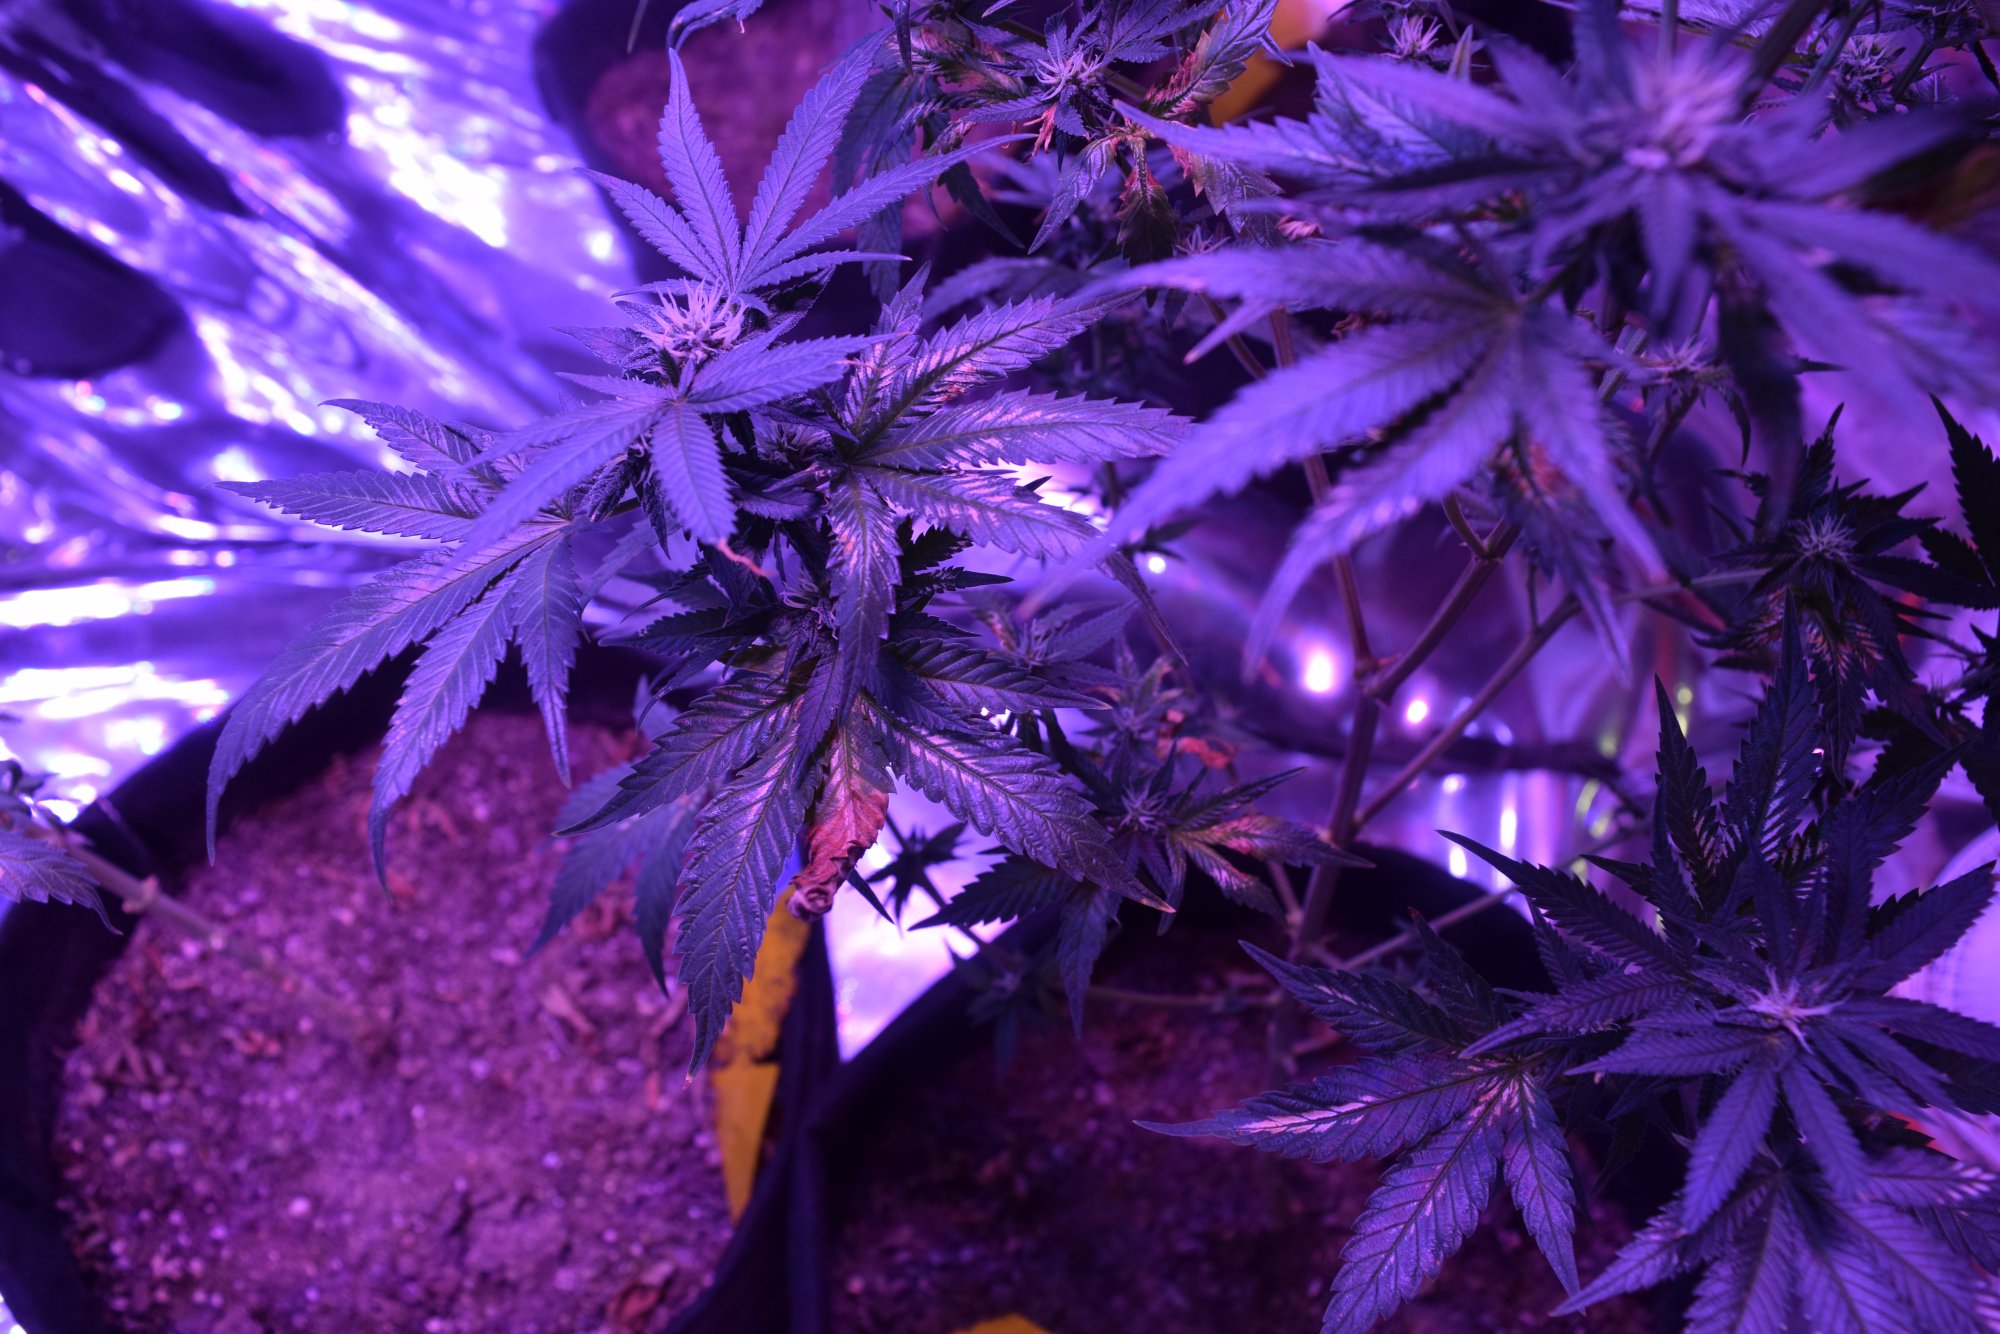 Im new and having problems in flower